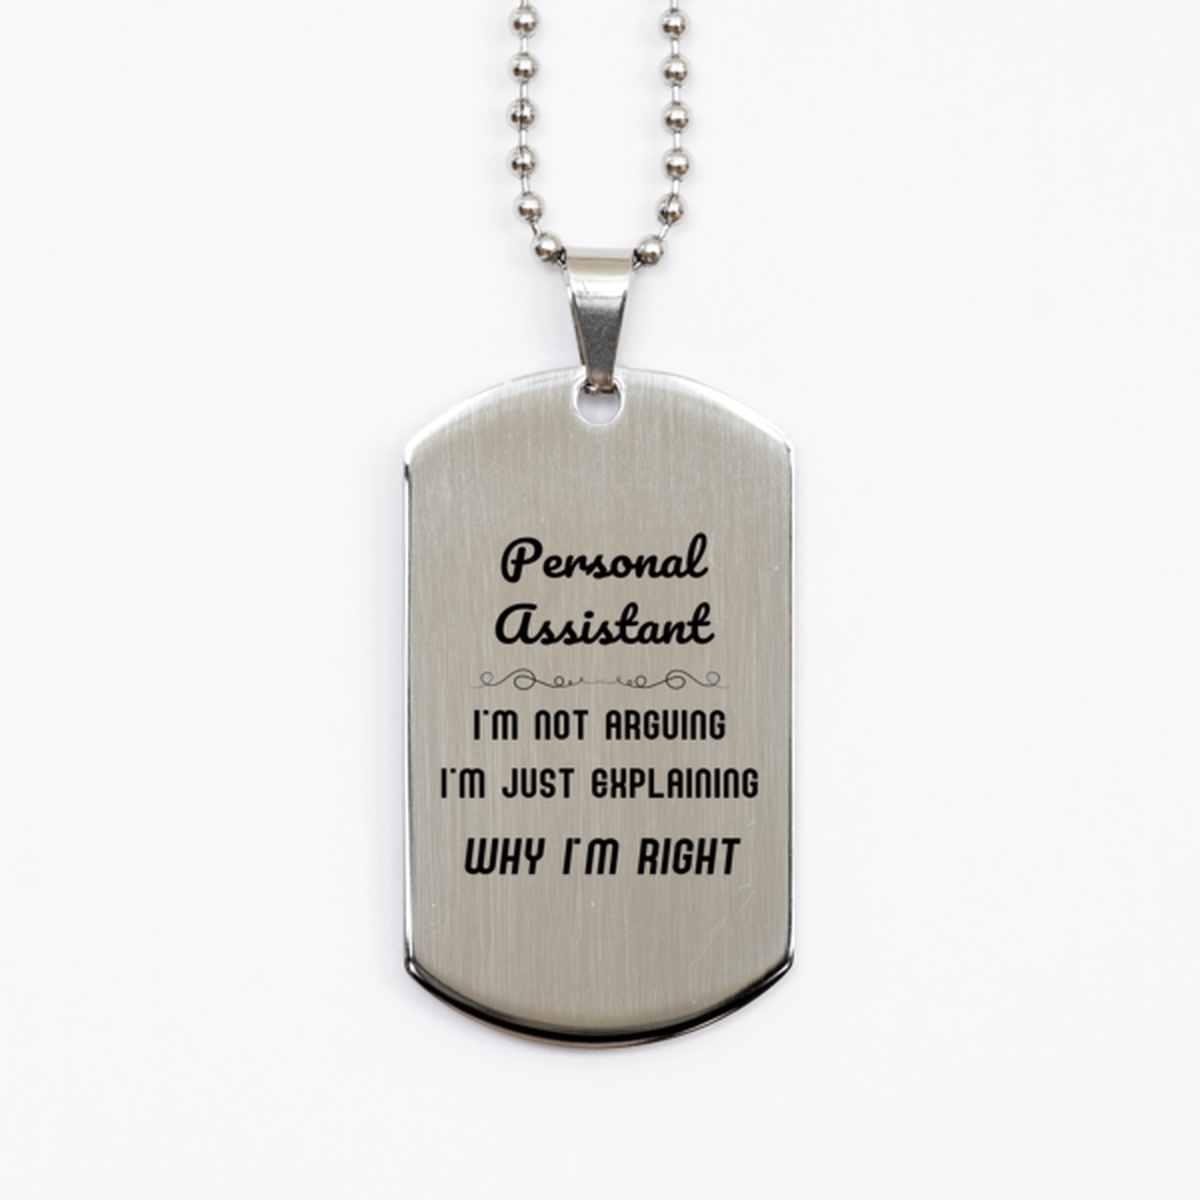 Personal Assistant I'm not Arguing. I'm Just Explaining Why I'm RIGHT Silver Dog Tag, Funny Saying Quote Personal Assistant Gifts For Personal Assistant Graduation Birthday Christmas Gifts for Men Women Coworker